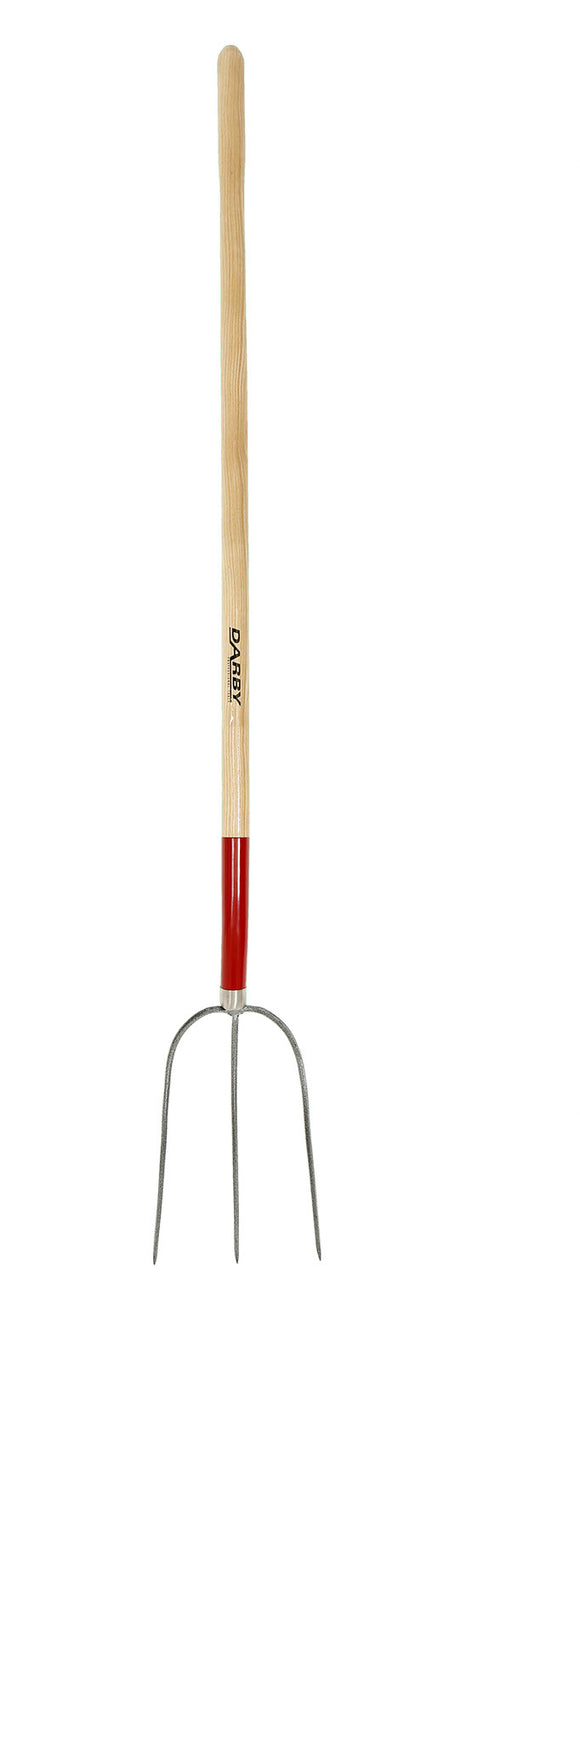 Darby 4ft Cap&Strap Hay Fork-3 Prong